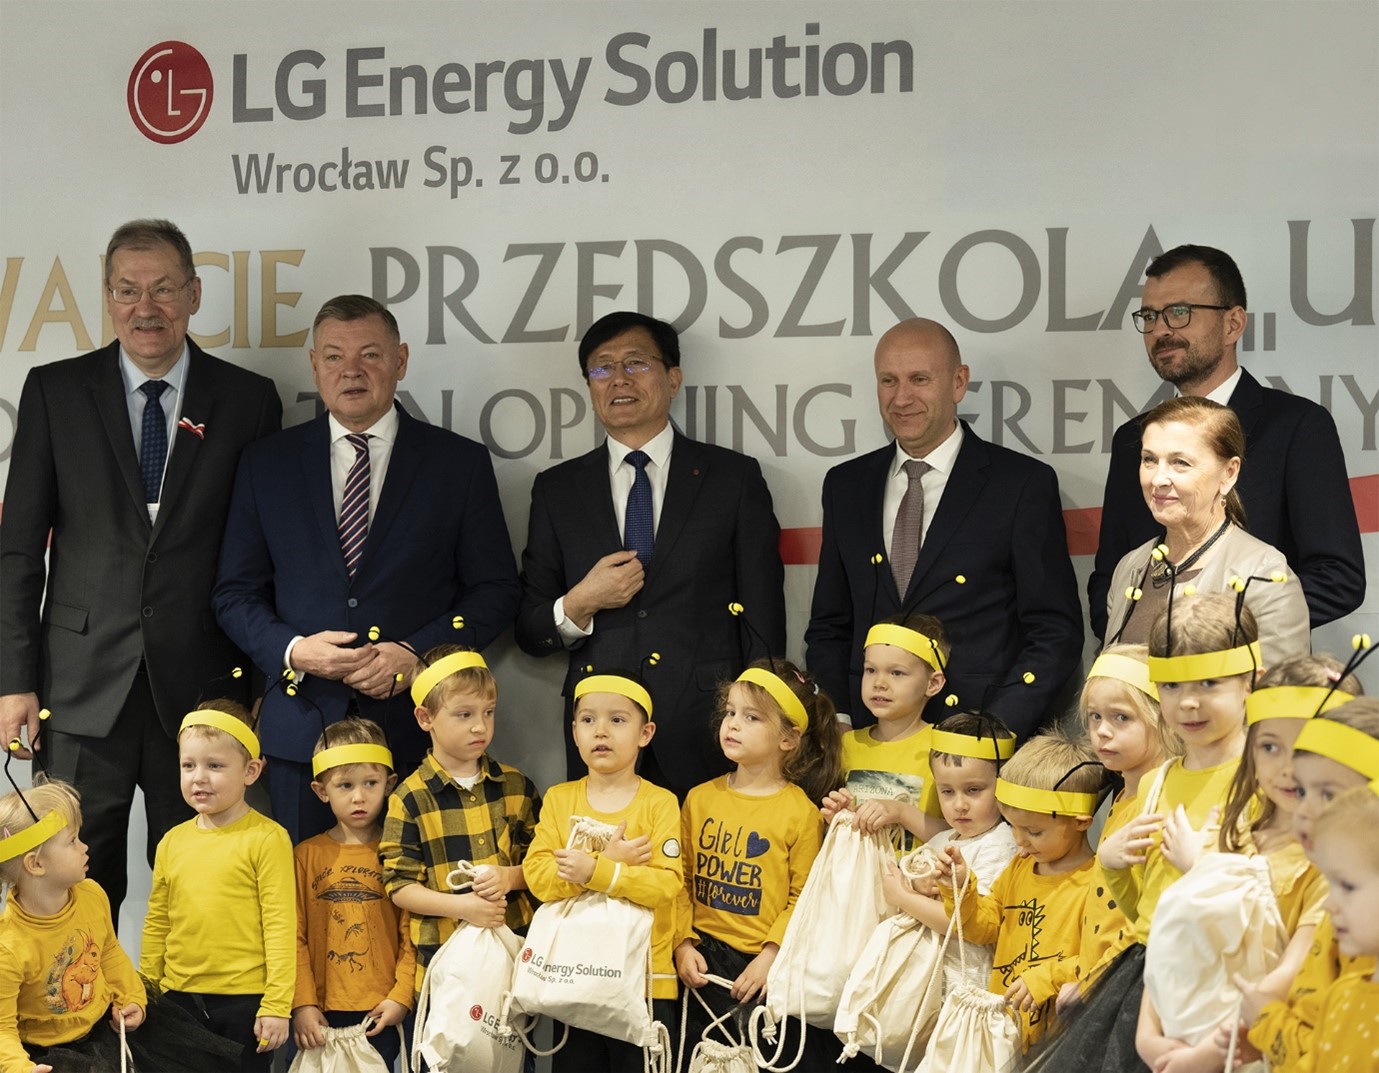 lg-energy-solution-wroclaw-opens-daycare-center-for-employees-community_1.jpg